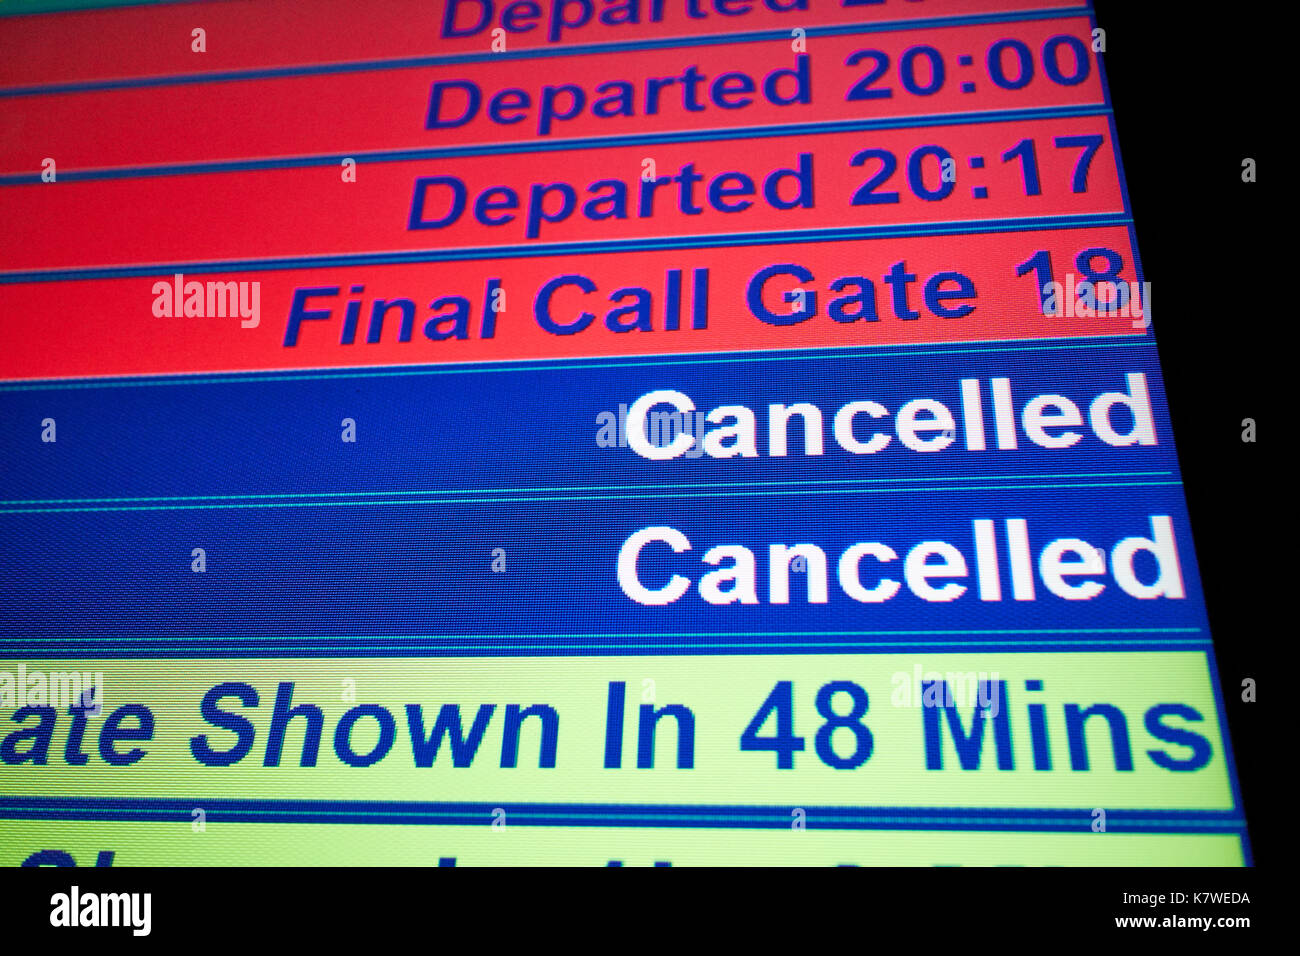 airport flight information screen showing departed, final call and cancelled flights Stock Photo